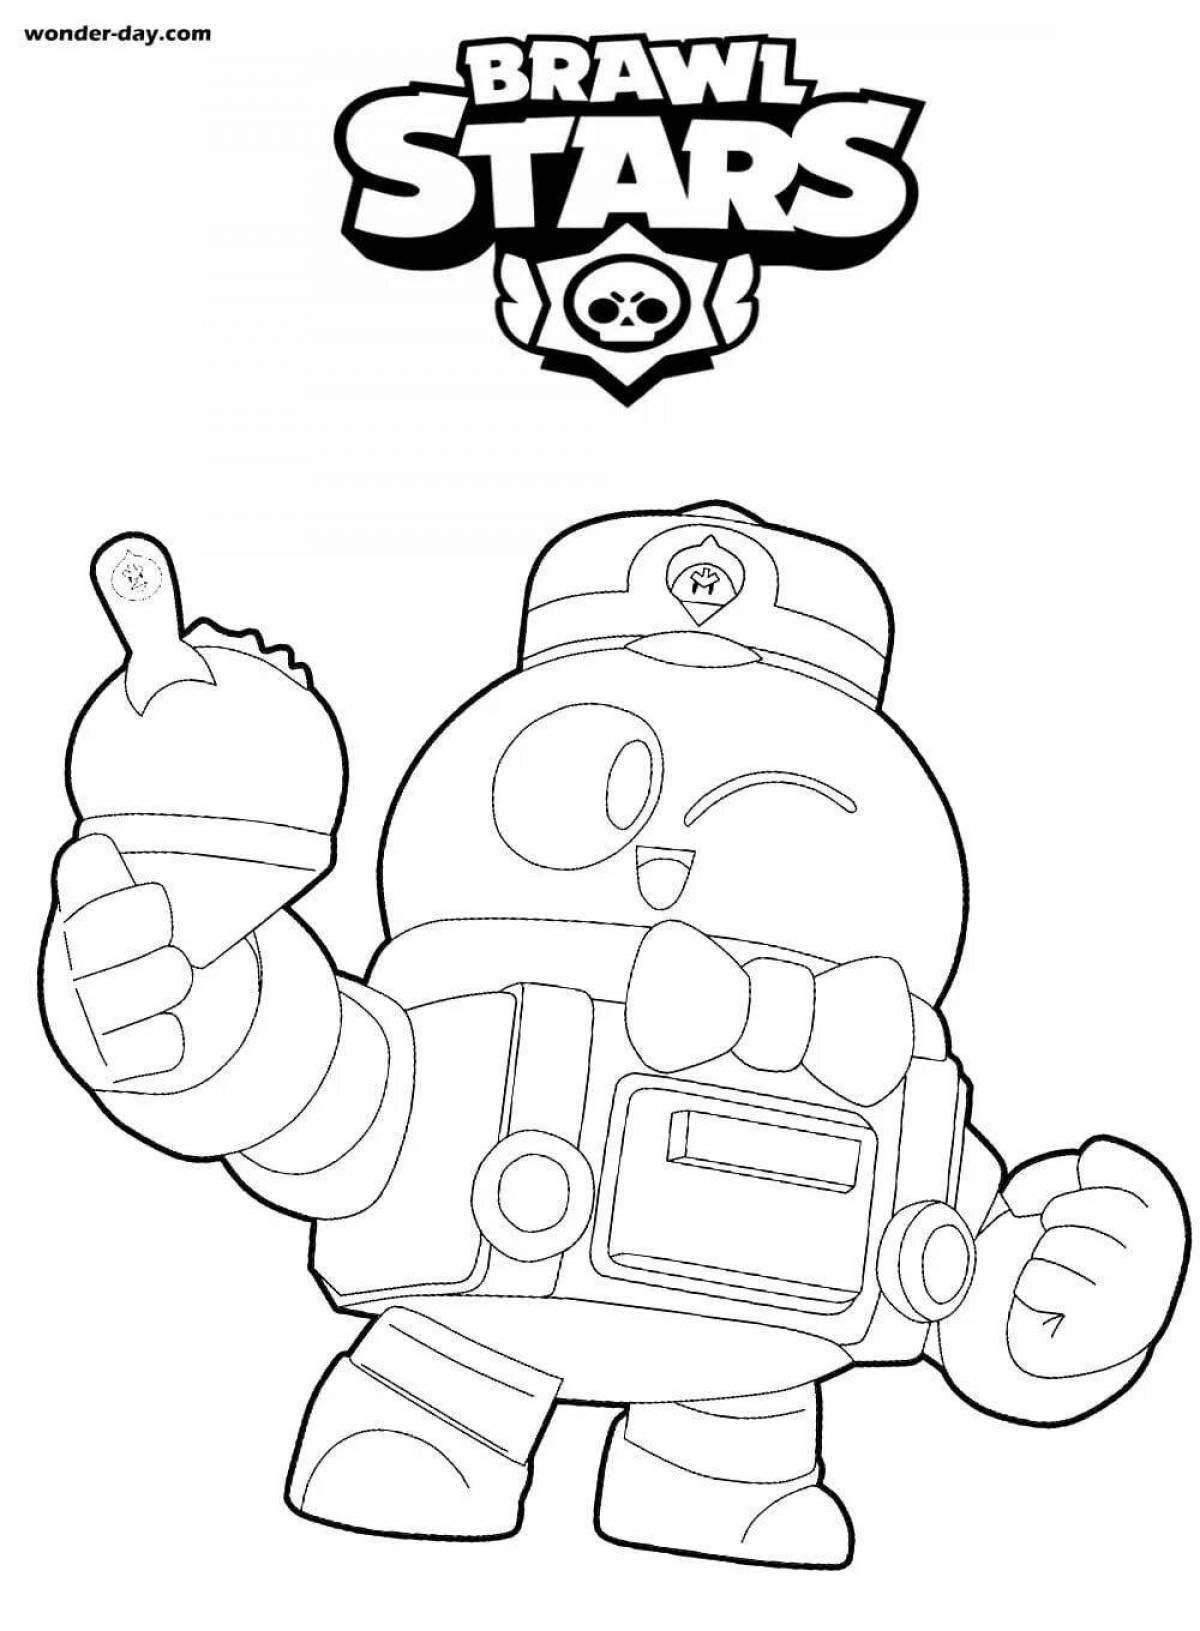 Great icons for coloring by brawl stars